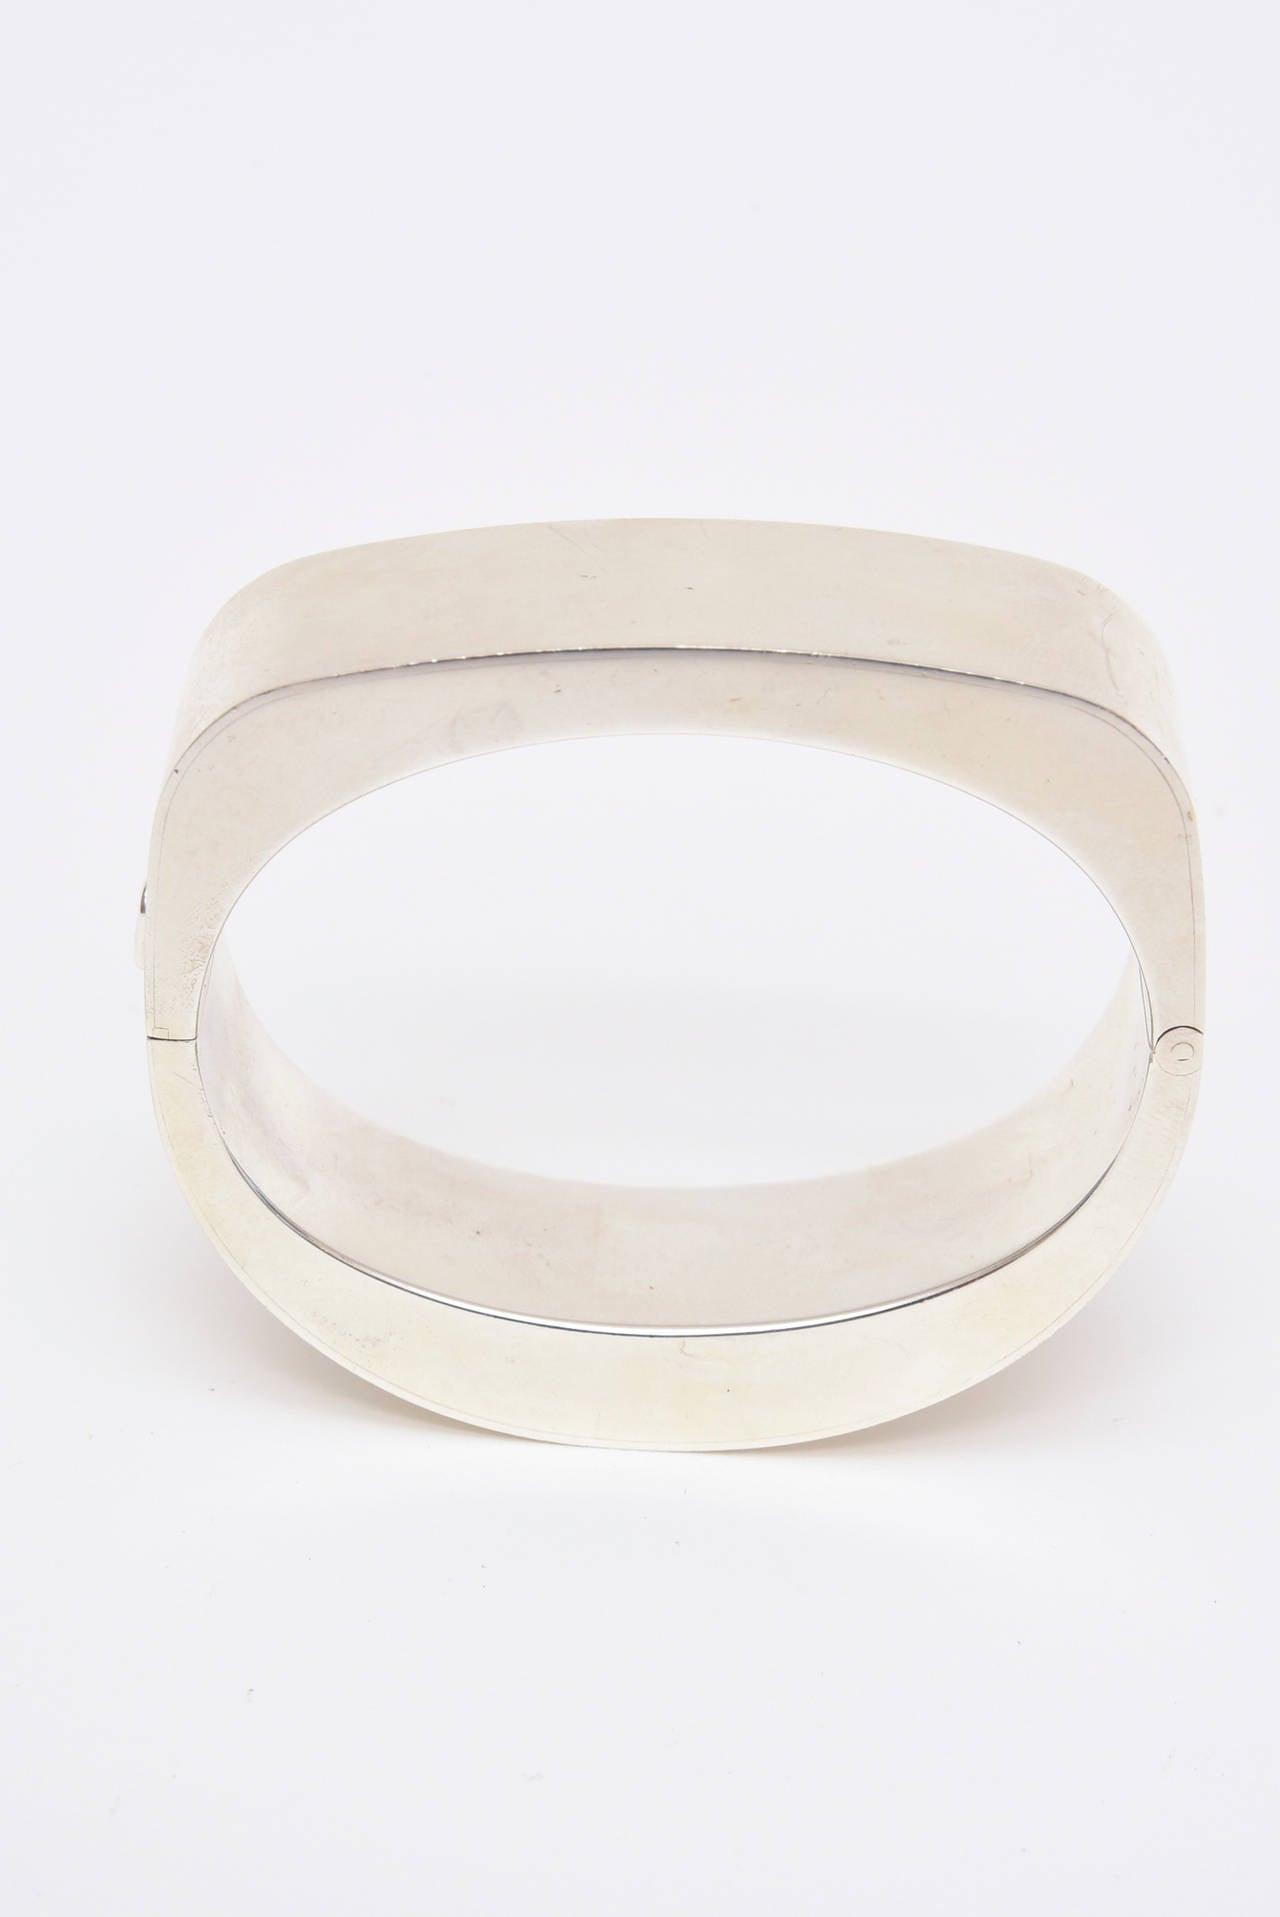 This modernist hallmarked sculptural sterling silver cuff bracelet hugs the wrist beautifully. There are hallmarks of the silver and other markings and the hinge closure fits well. It will fit ONLY a small wrist of 6